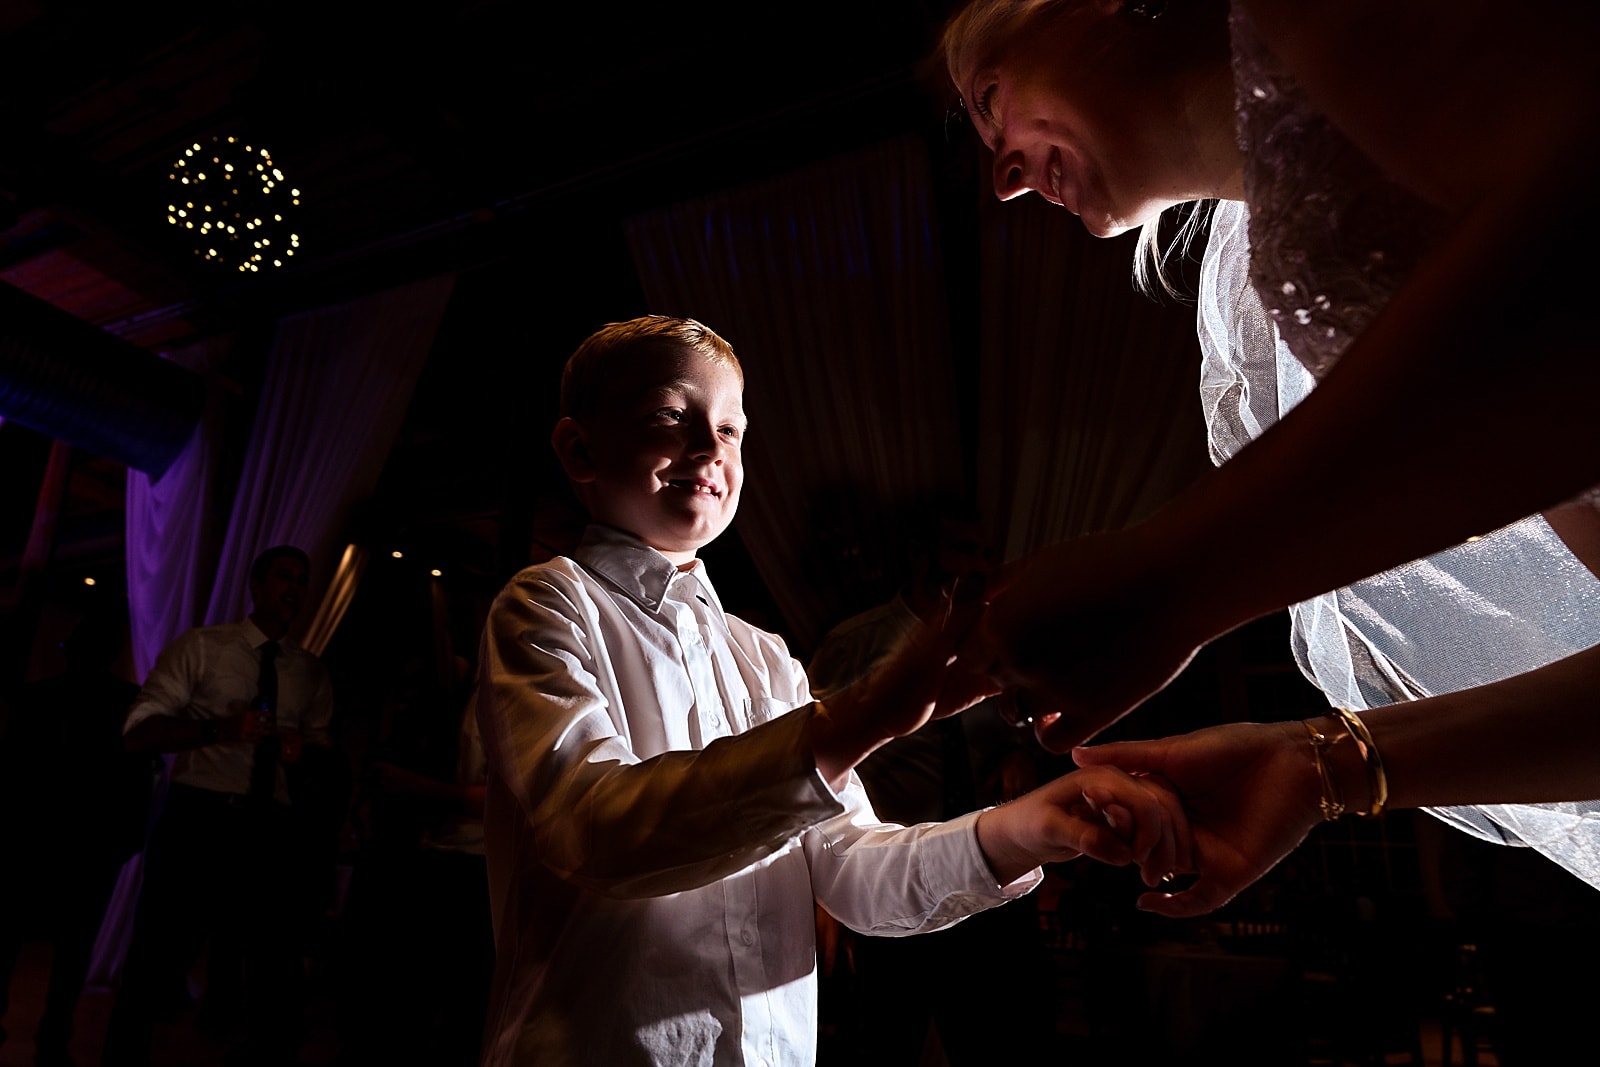 bride dances with the ring bearer at a super fun wedding